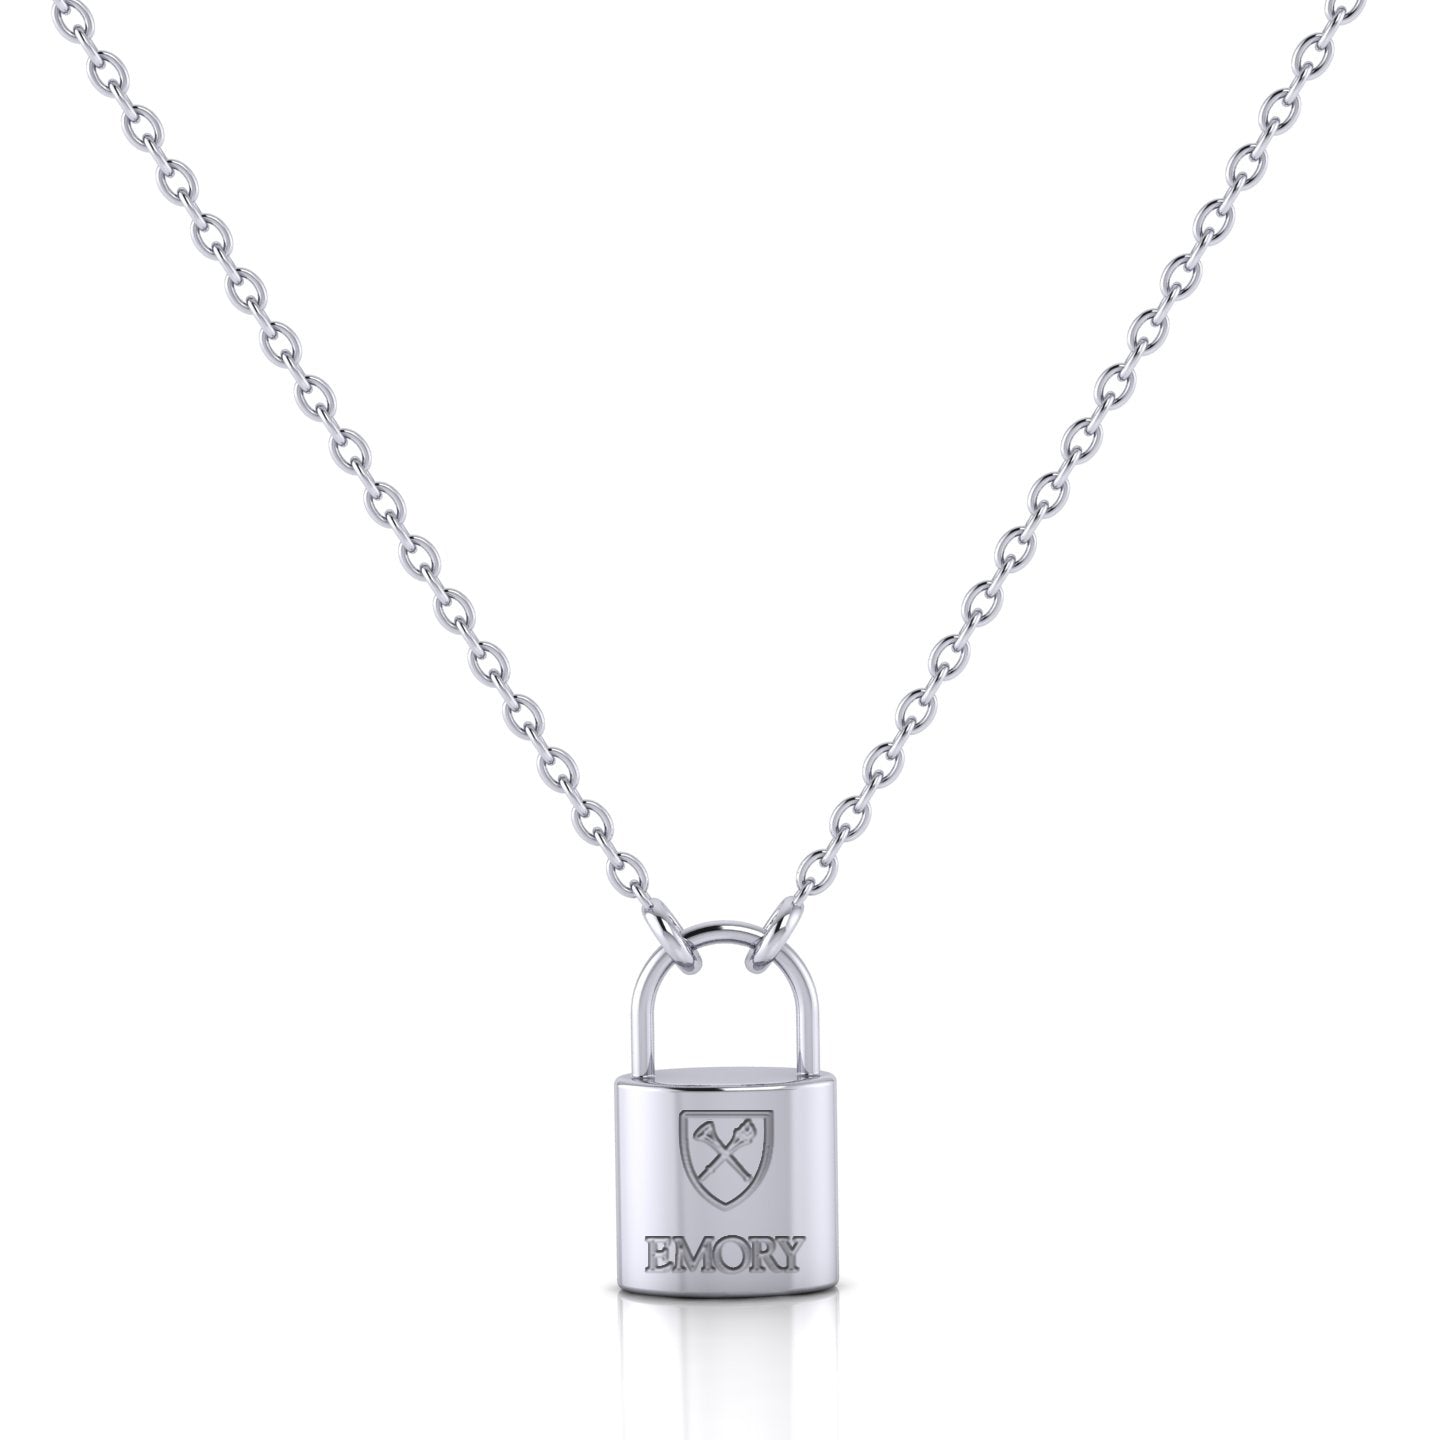 A close-up view of the Emory Padlock Pendant in sterling silver, featuring its sleek padlock design and a polished, shiny finish.